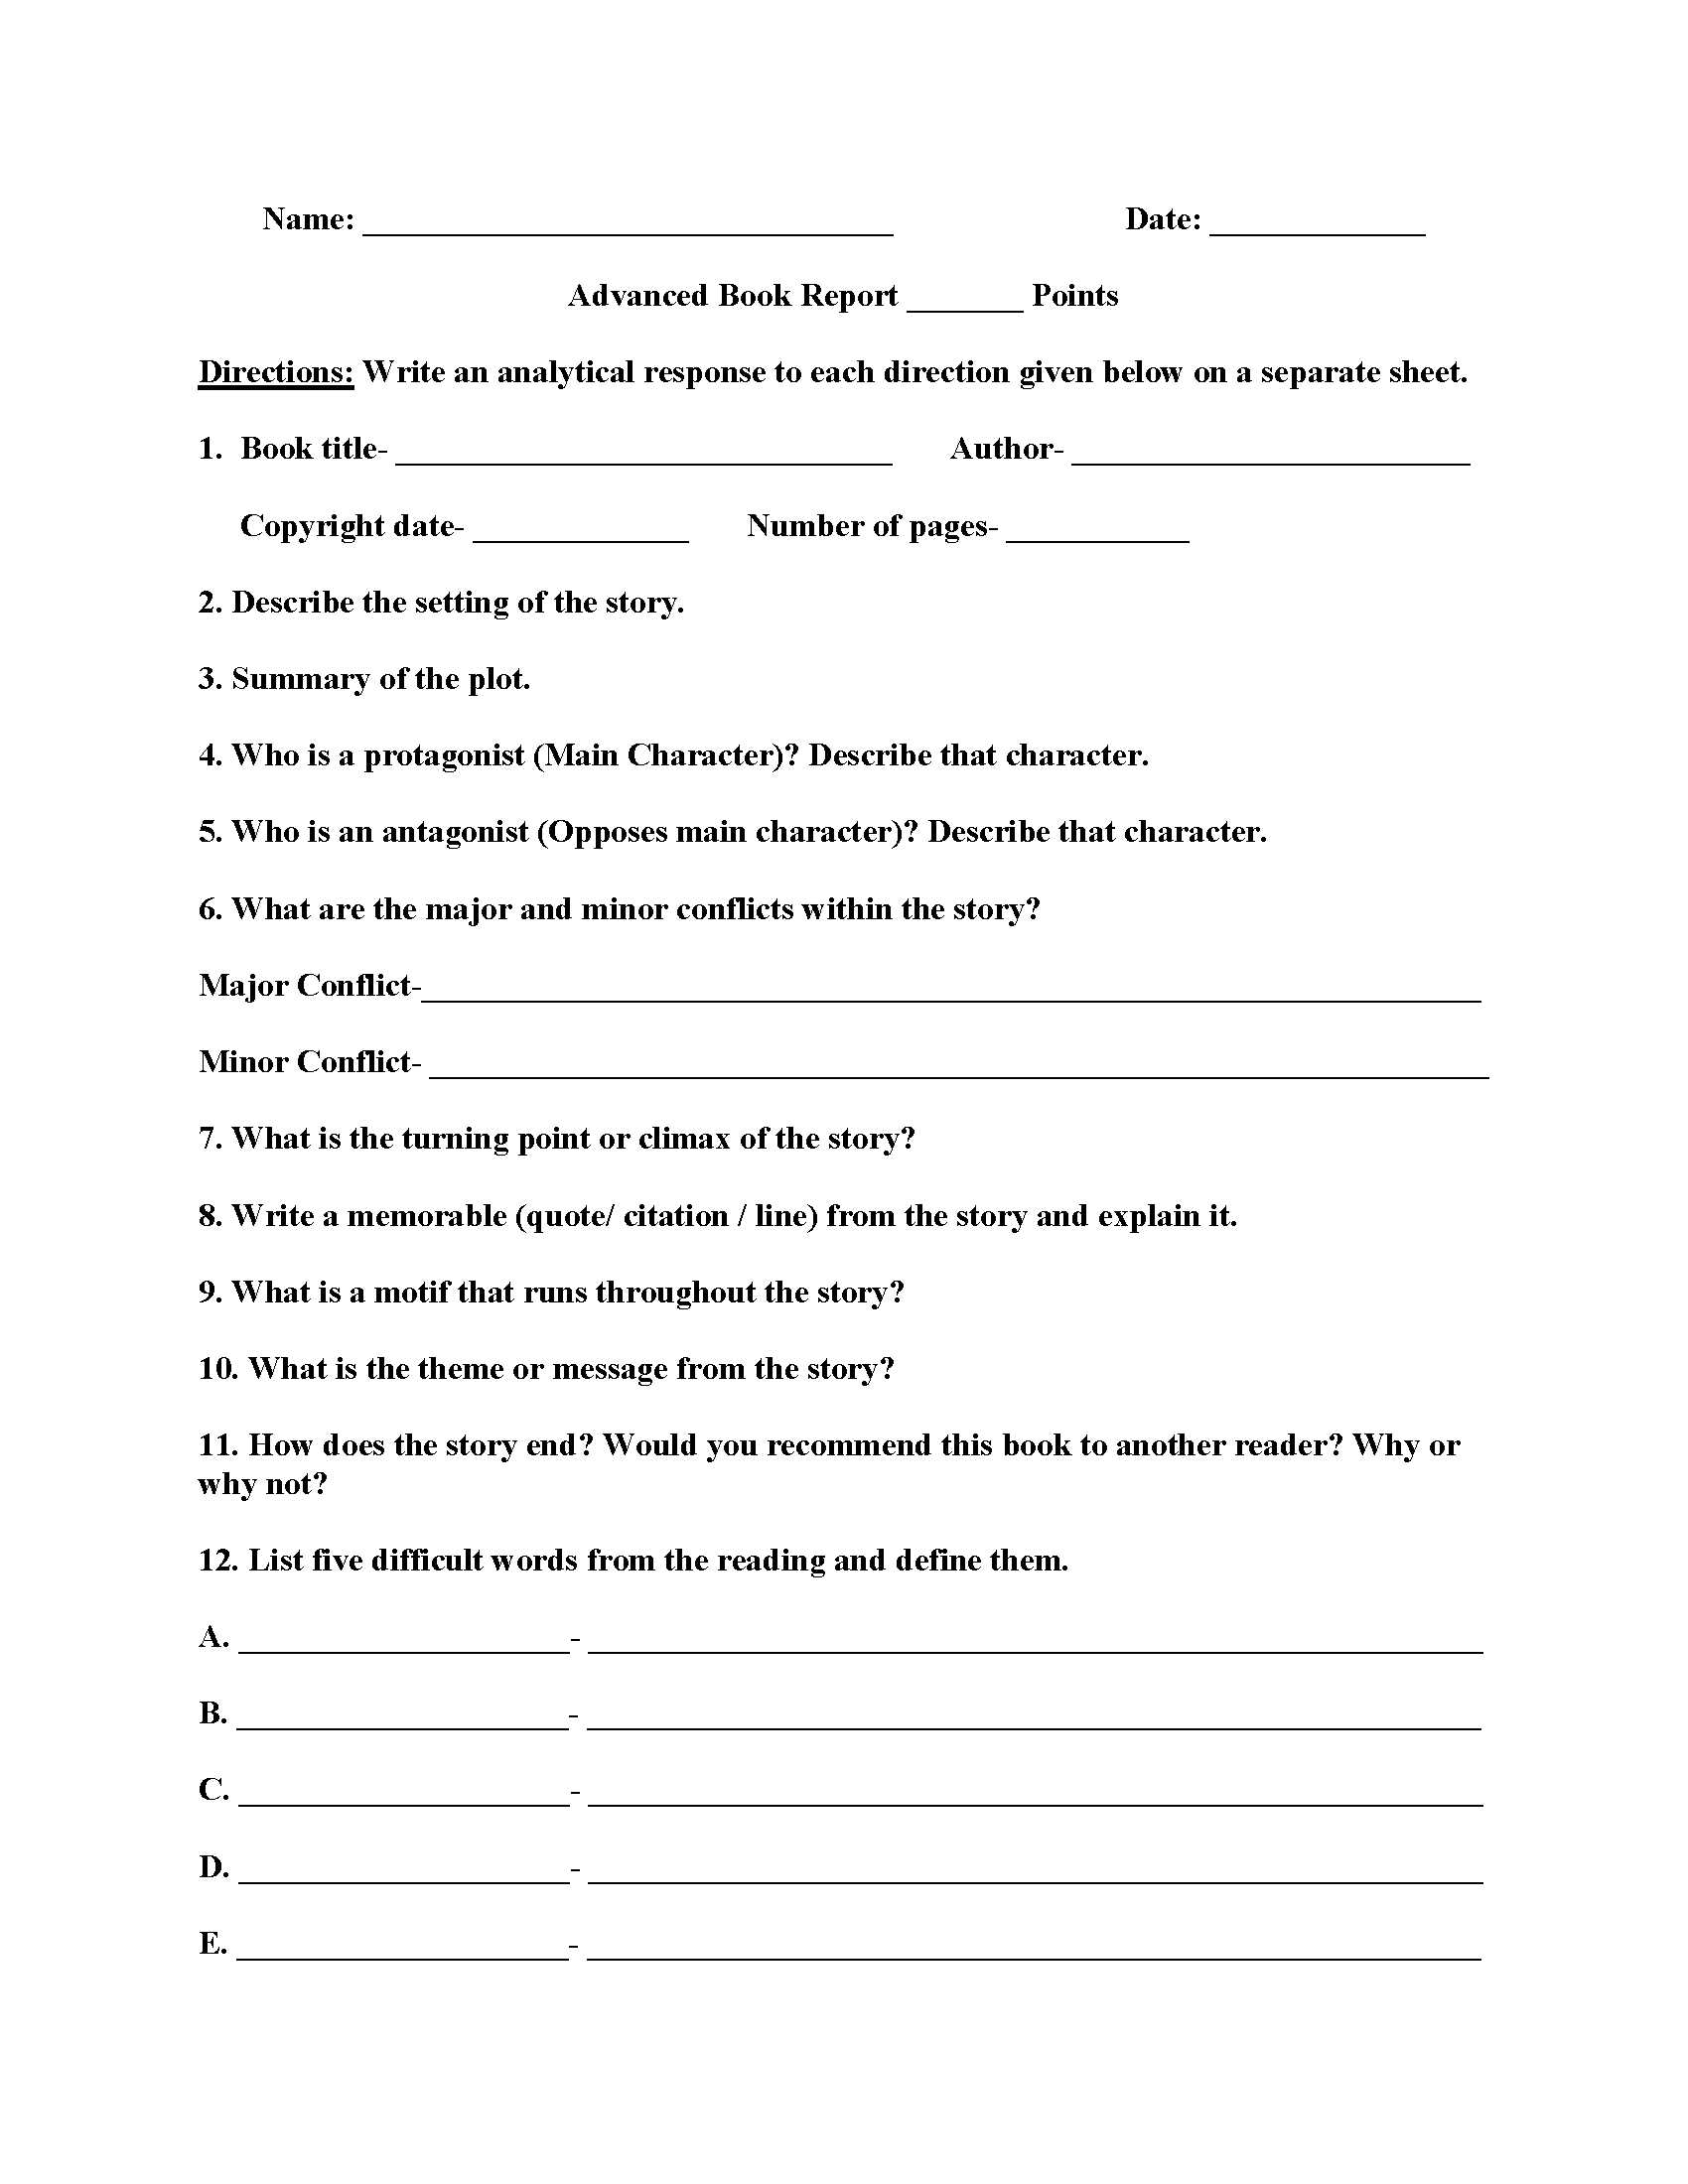 3rd Grade Reading Staar Test Practice Worksheets Along with Advanced Book Report Worksheets English Pinterest